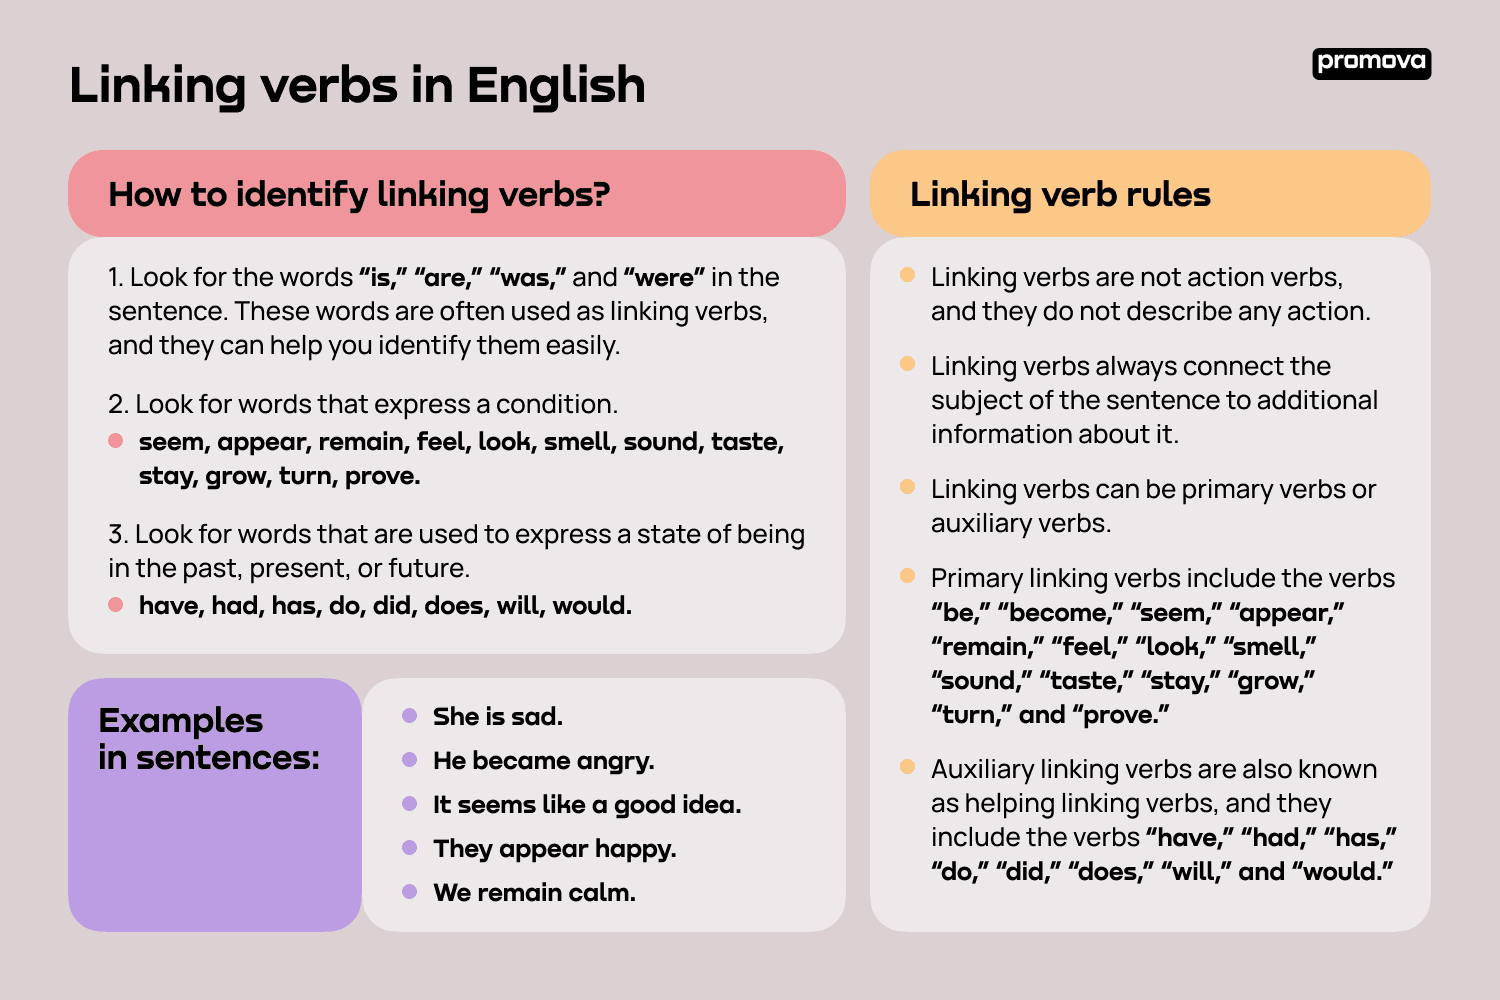 Linking verbs in English